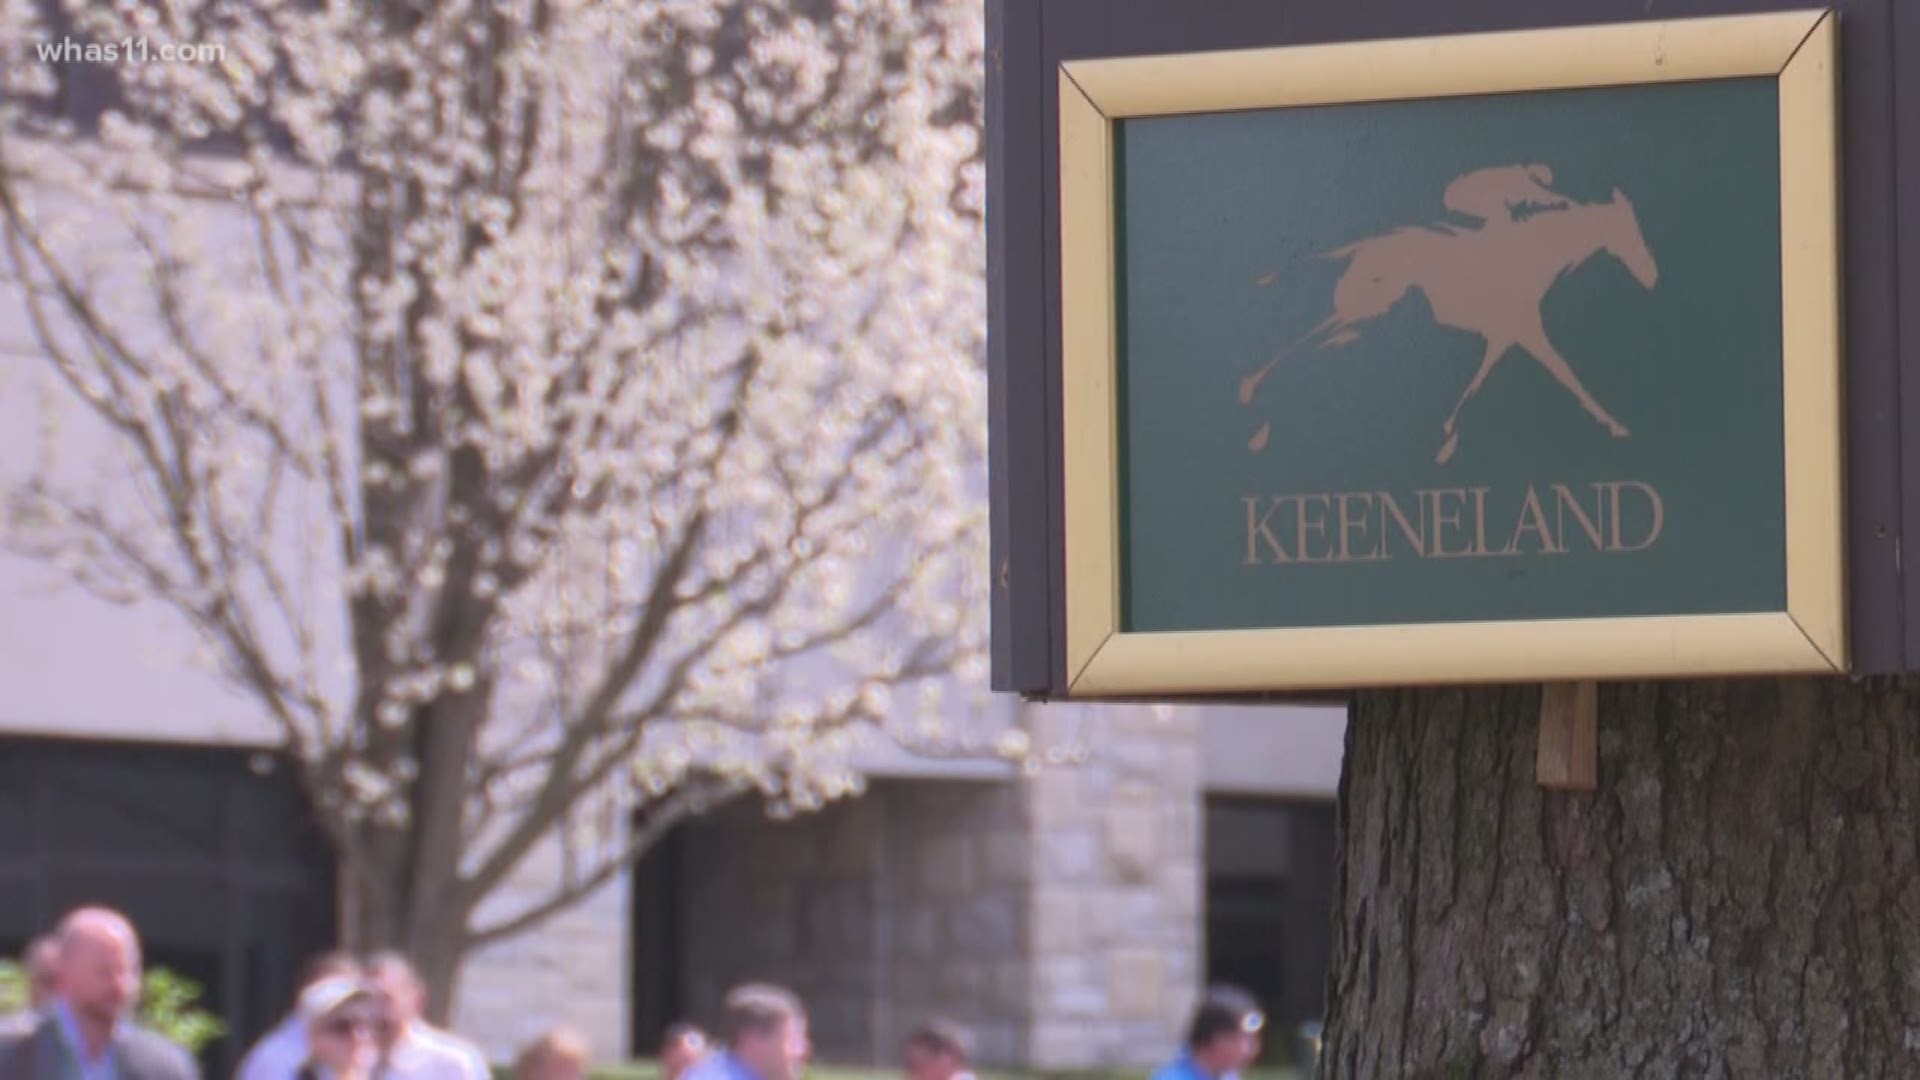 As thousands of visitors celebrate Keeneland opening day, there are serious concerns about safety following the deaths of 23 horses at Santa Anita racetrack in California.